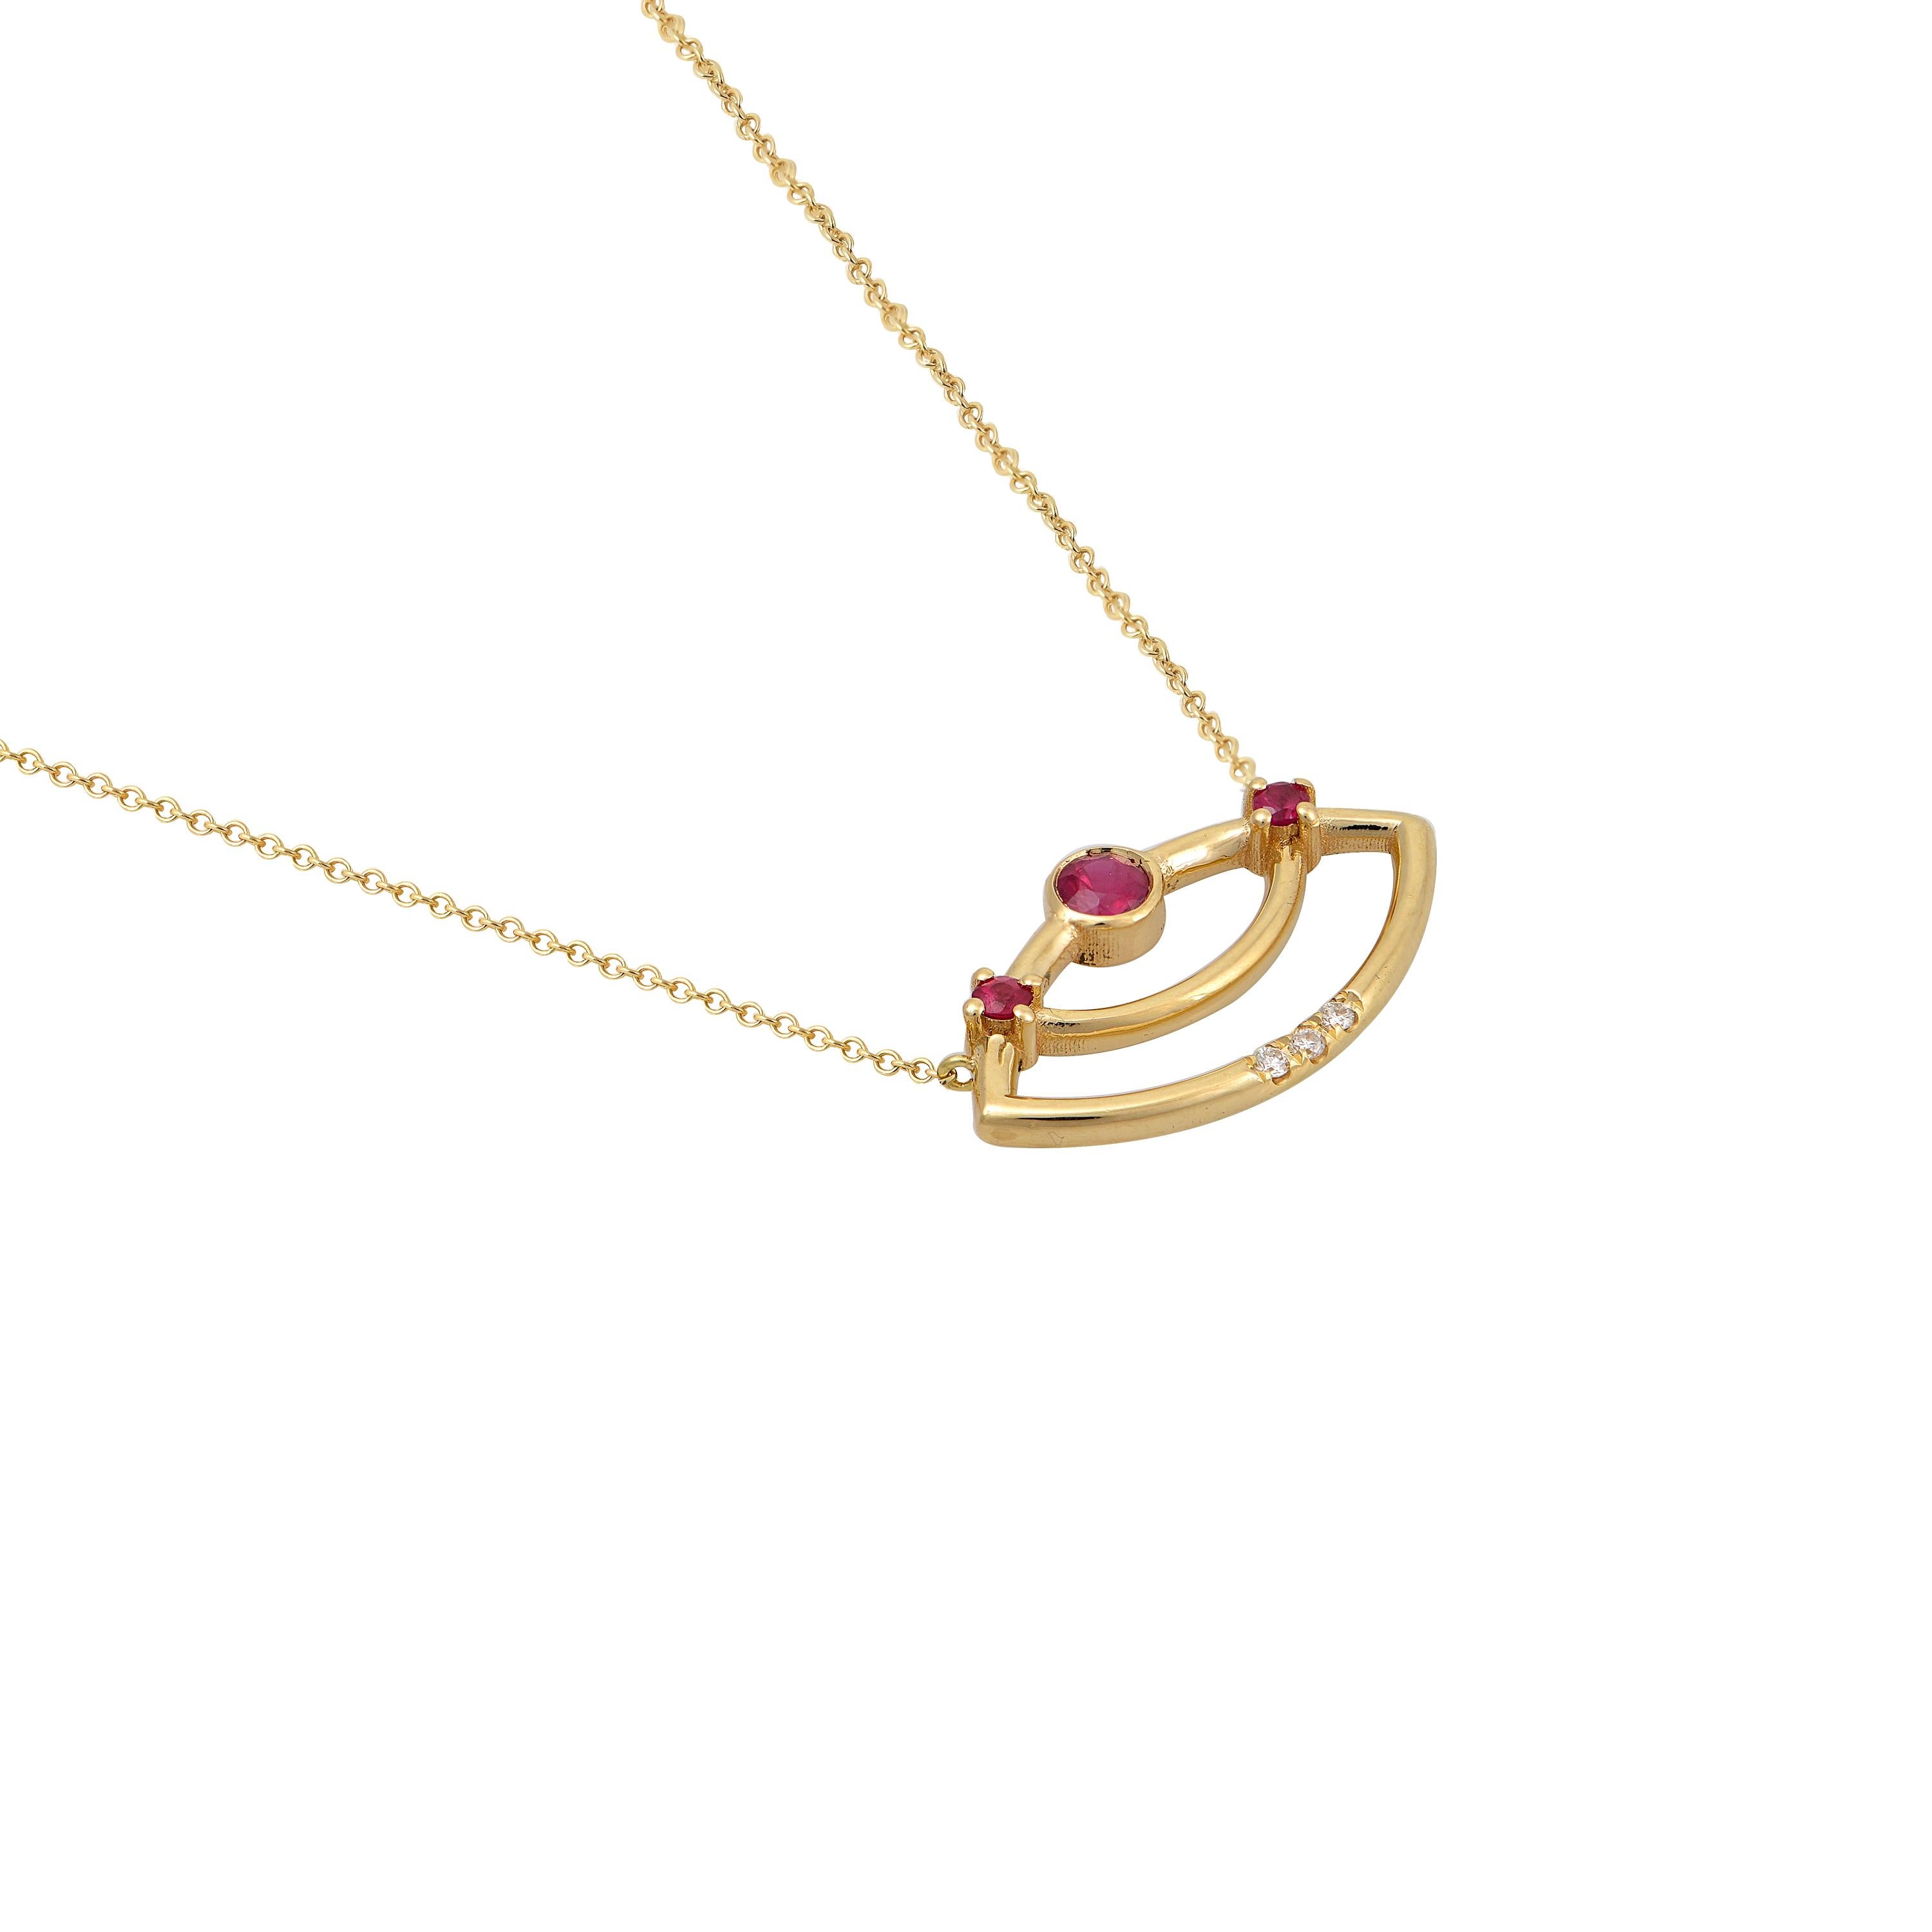 Designer: Alexia Gryllaki
Dimensions: motif 19x16mm, chain 420mm and a second link at 400mm
Weight: approximately 2.3g 
Barcode: ING042P

The Interlocking Geometry pendant in 18 karat yellow gold with rubies approx. 0.17cts and round brilliant-cut